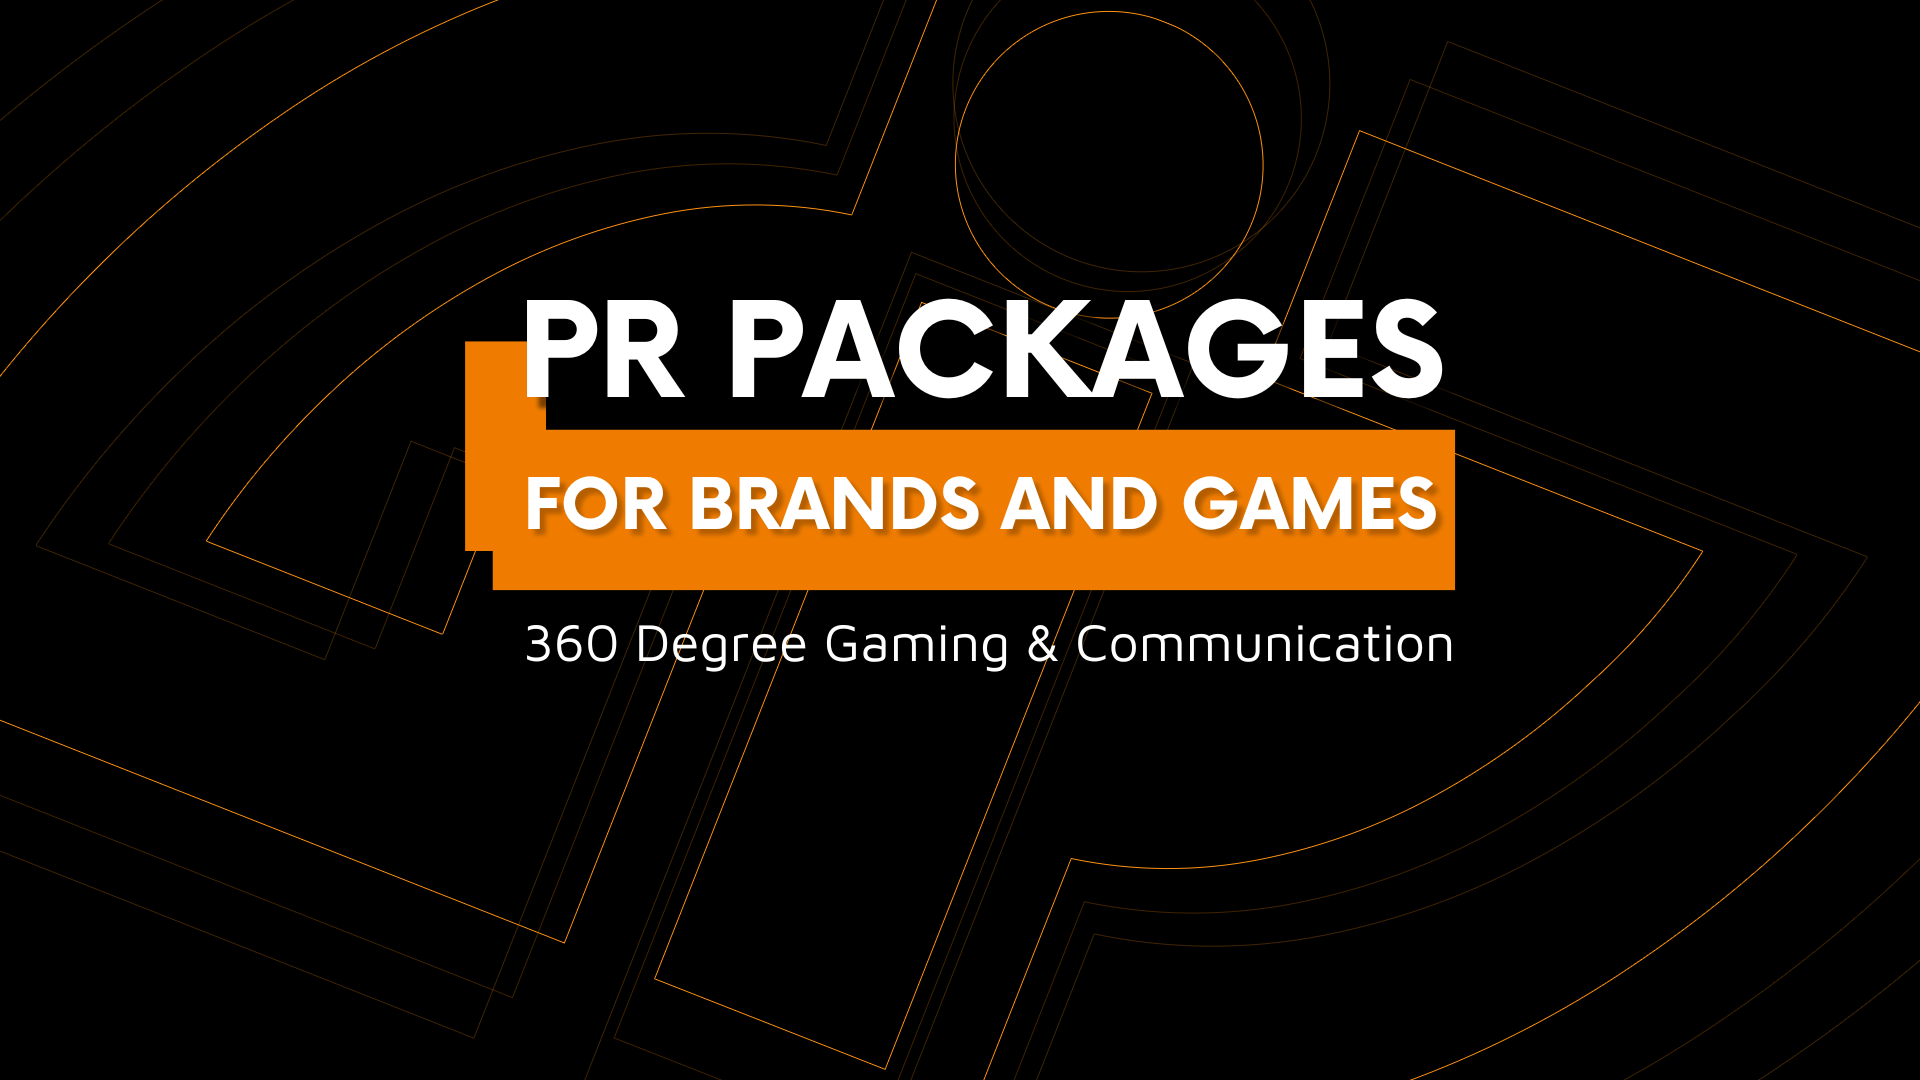 Gaming and Esports For Brands - PR Packages